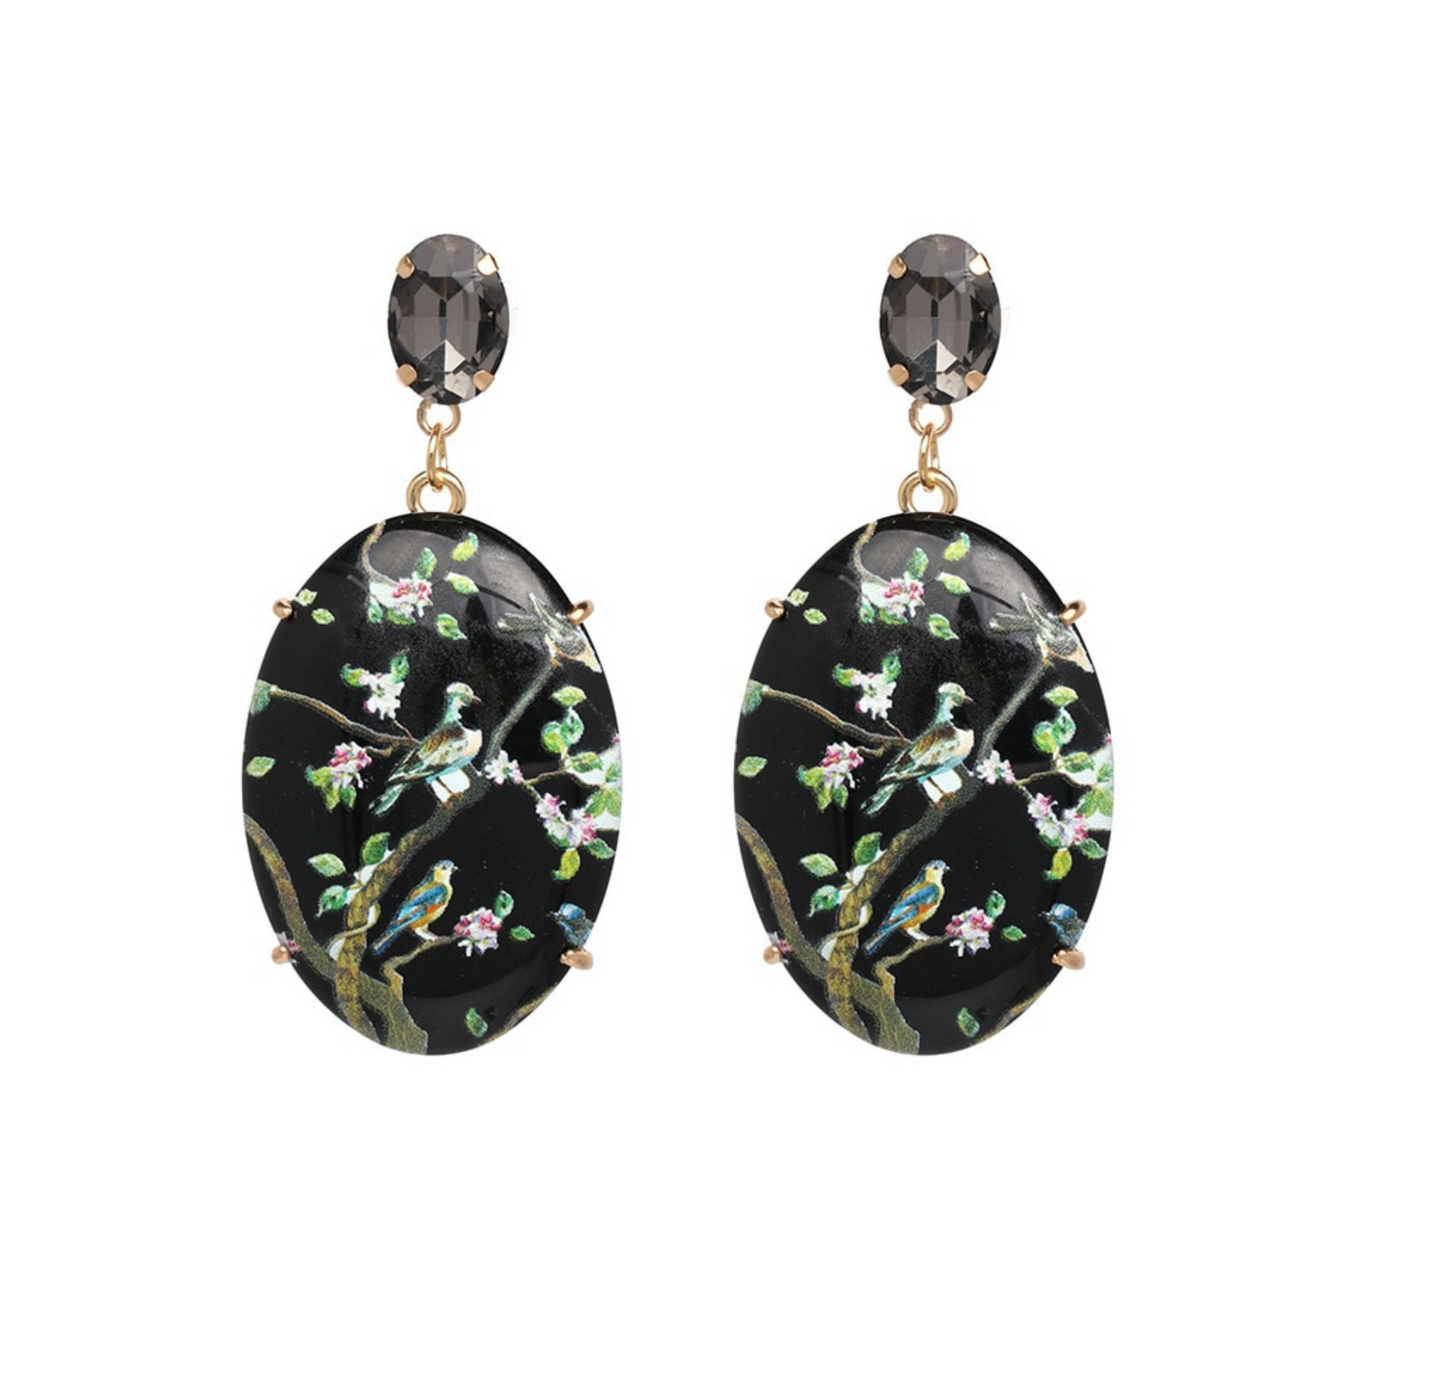 Black Oval Birds On Floral Branches Drop Earrings